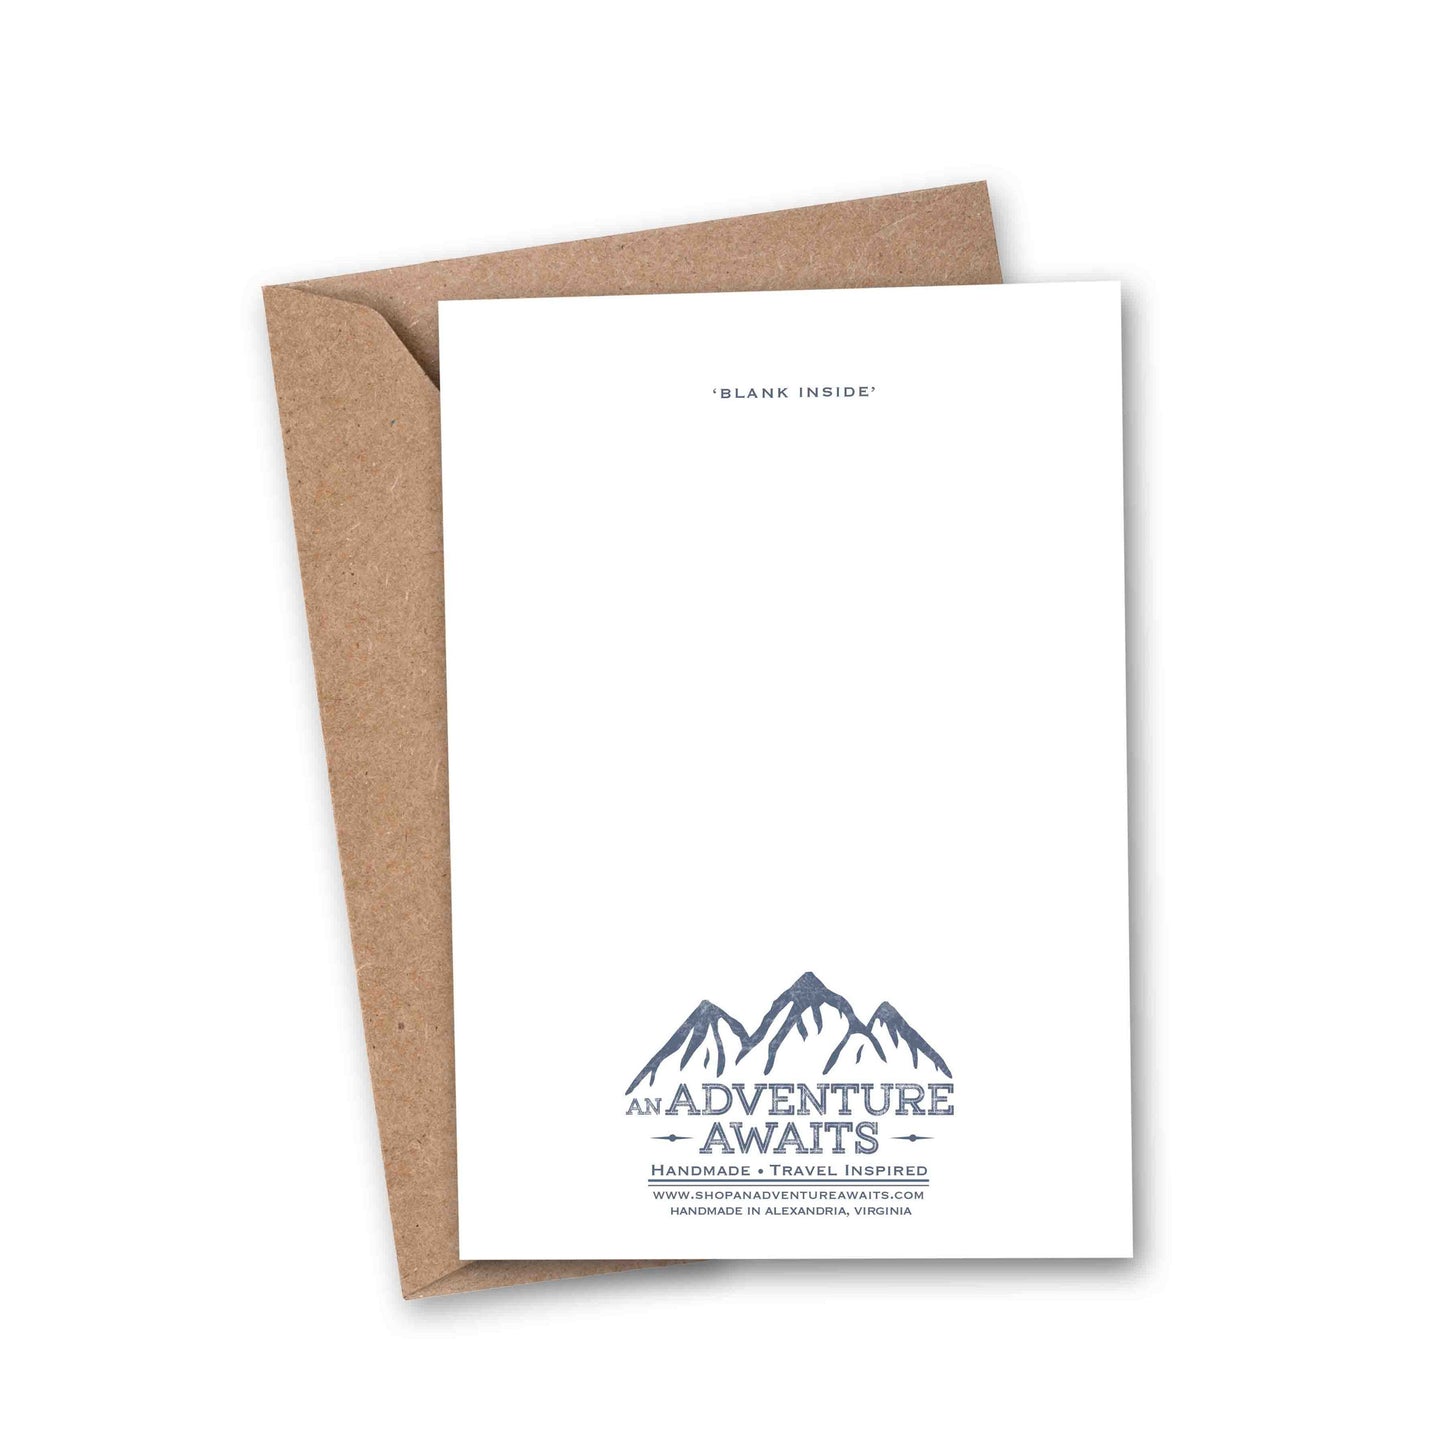 and so the adventure begins world print greeting card back logo